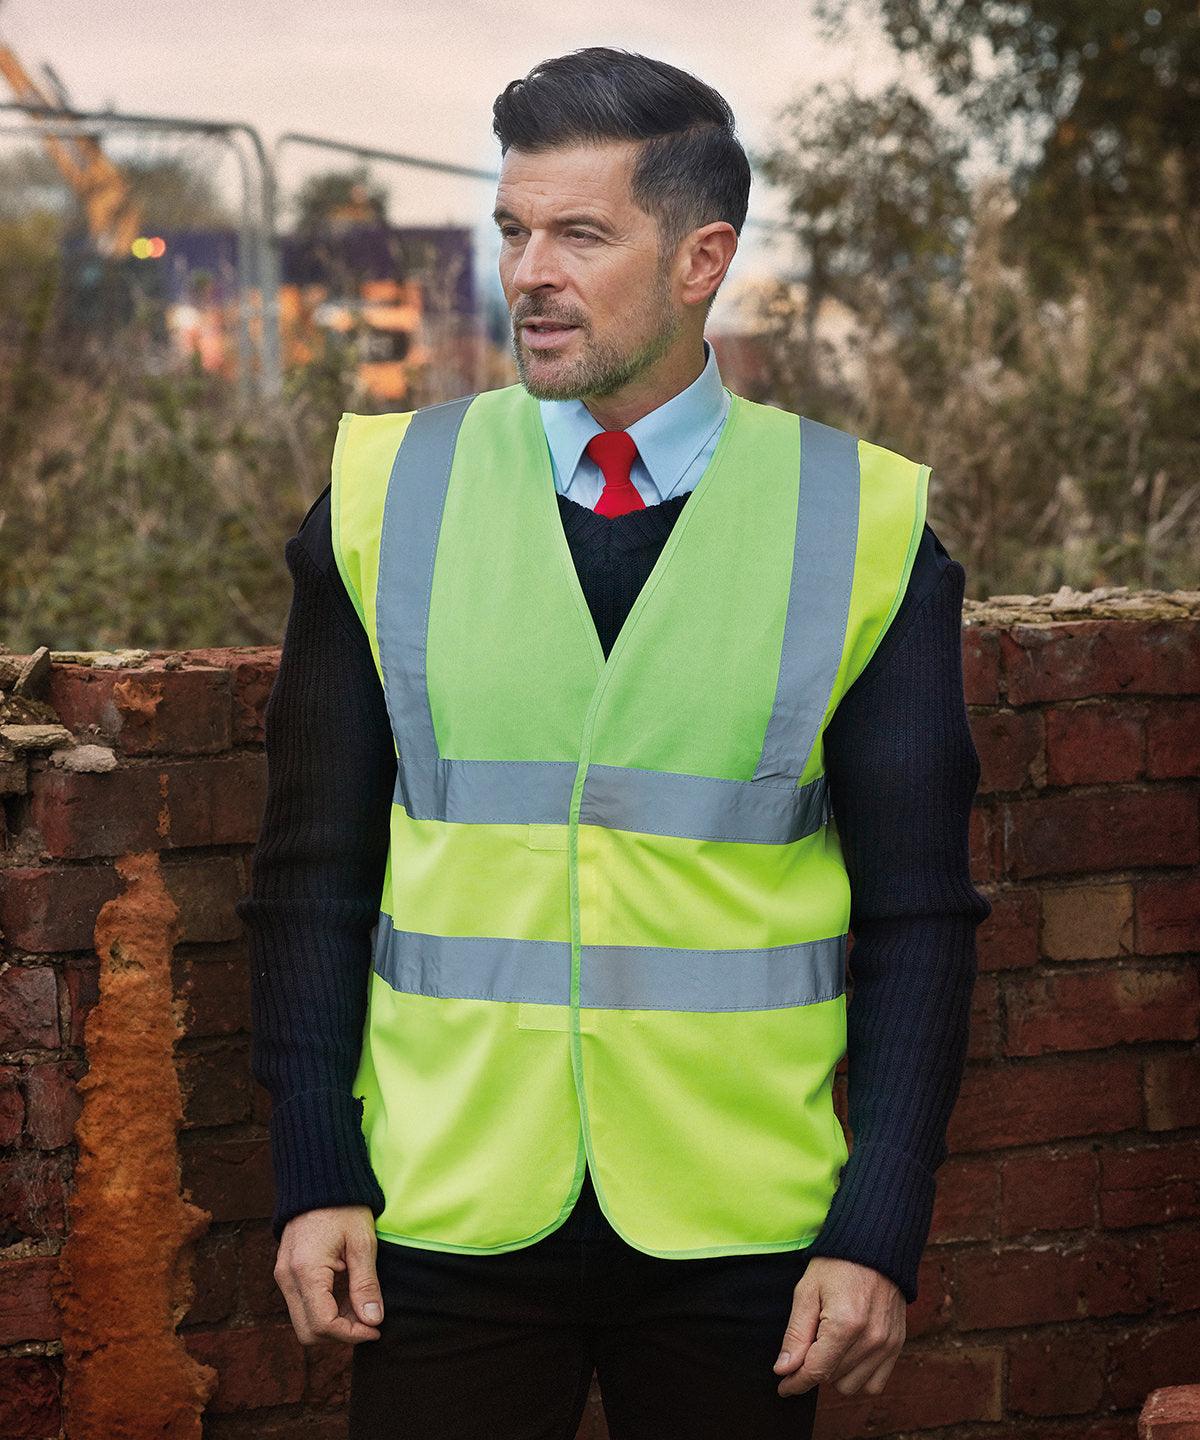 White - Hi-vis 2-band-and-braces waistcoat (HVW100) Safety Vests Yoko Must Haves, Personal Protection, Plus Sizes, Safety Essentials, Safetywear, Workwear Schoolwear Centres